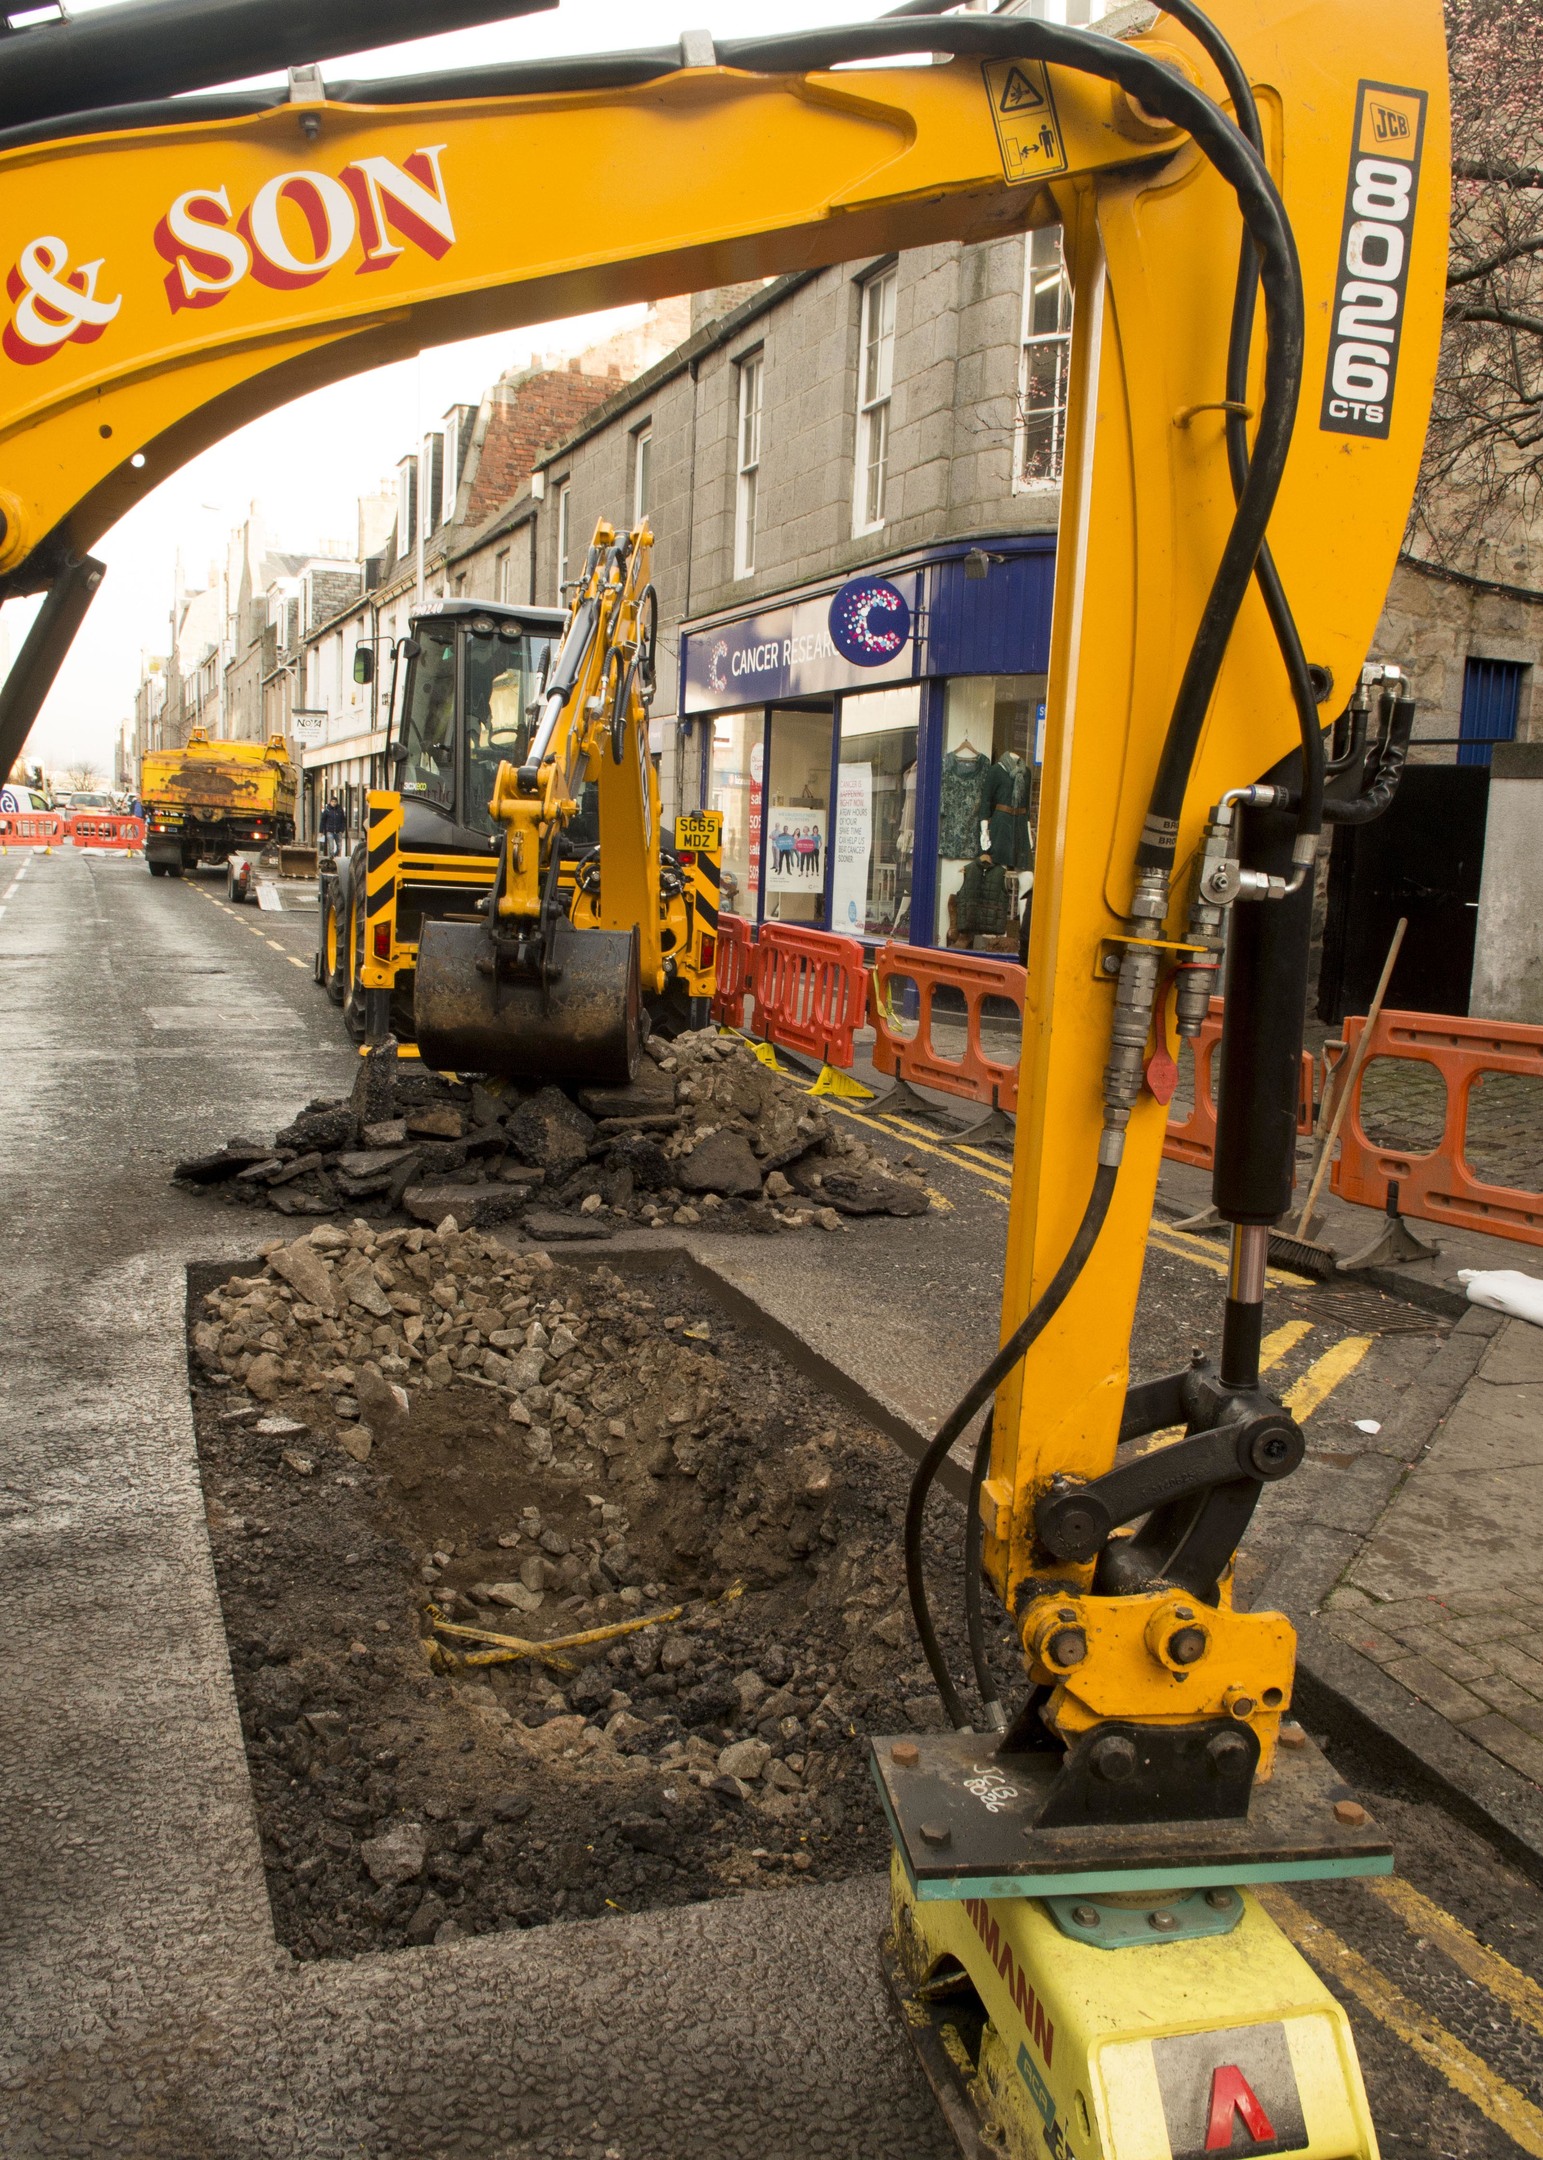 15/01/16Road services repair a hole that appeared in CHAPEL STREET- aberdeen